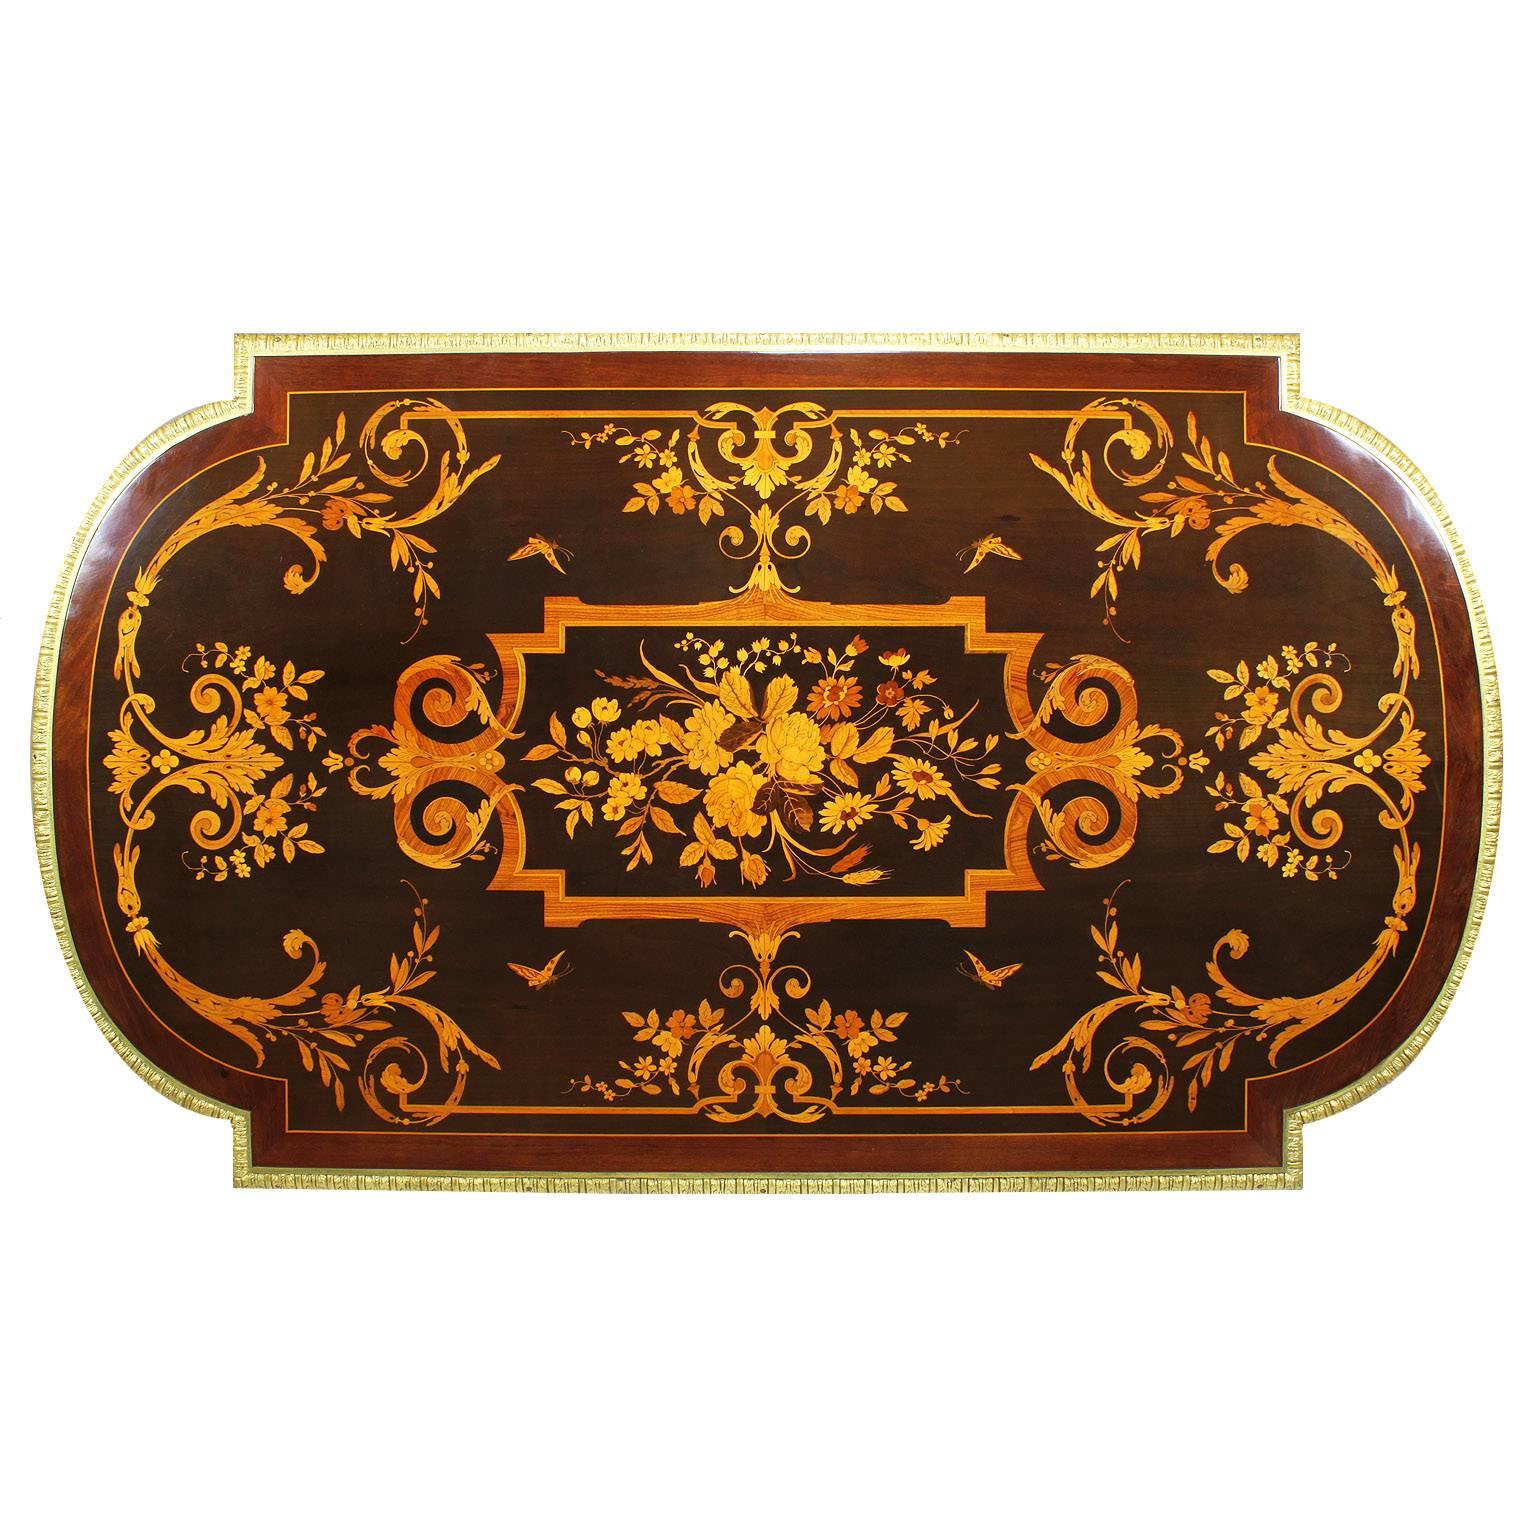 A fine French 19th century Louis XVI style ebonized gilt bronze-mounted tulipwood, kingwood and fruitwood floral marquetry single-drawer center table, desk or writing table. The ornately decorated marquetry top, centered with a floral bouquet,